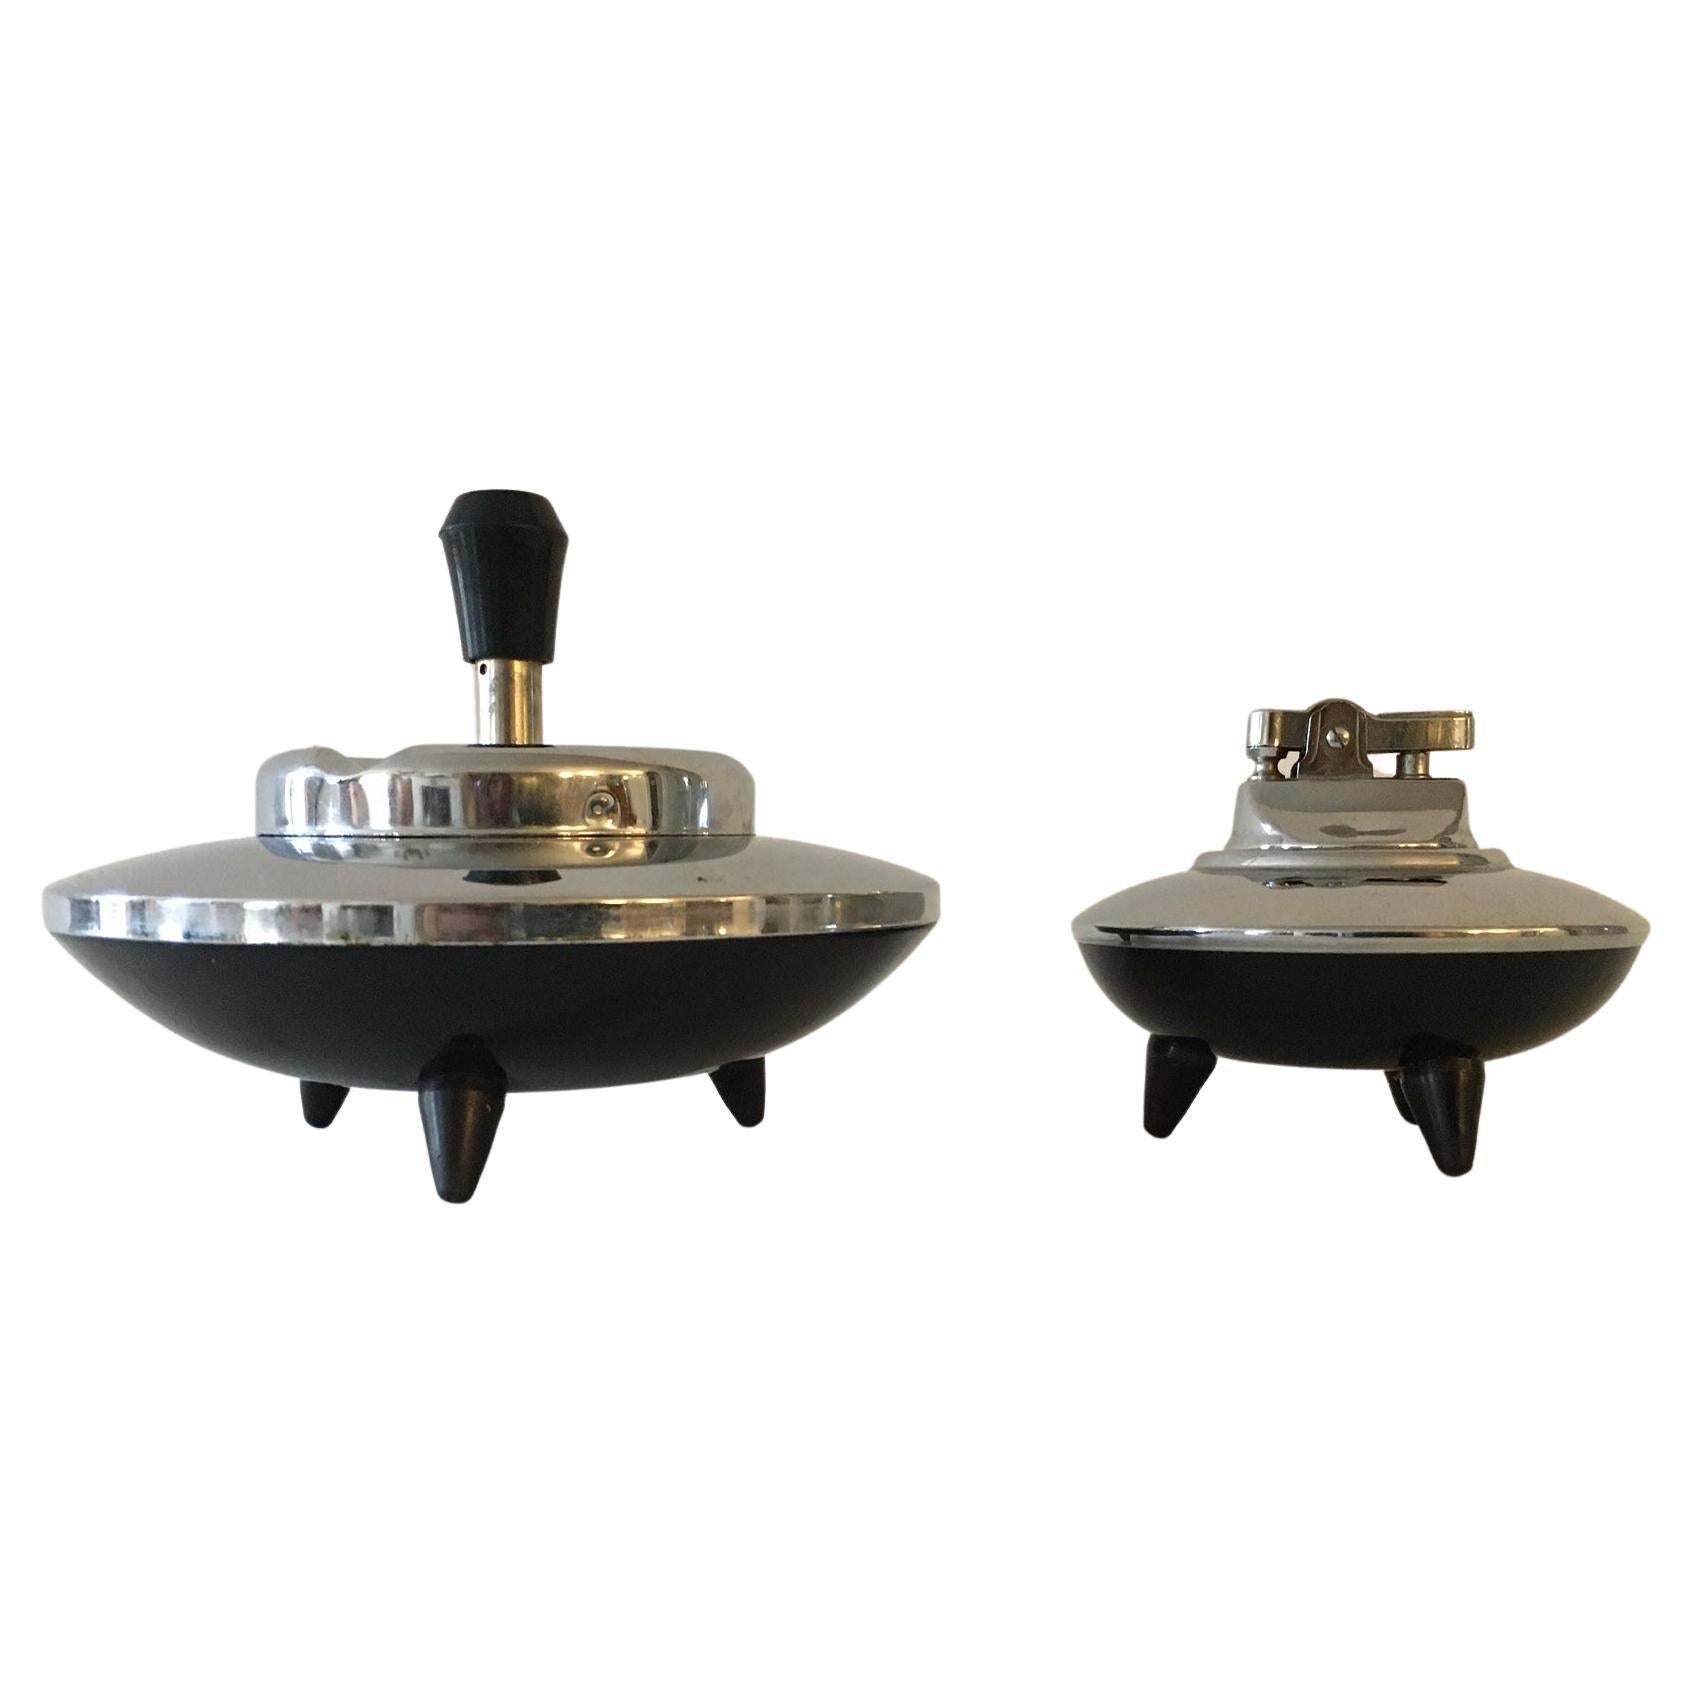 Japanese Space Age Chrome & Black Enamel 2 Piece Flying Saucer Smoker's Set For Sale